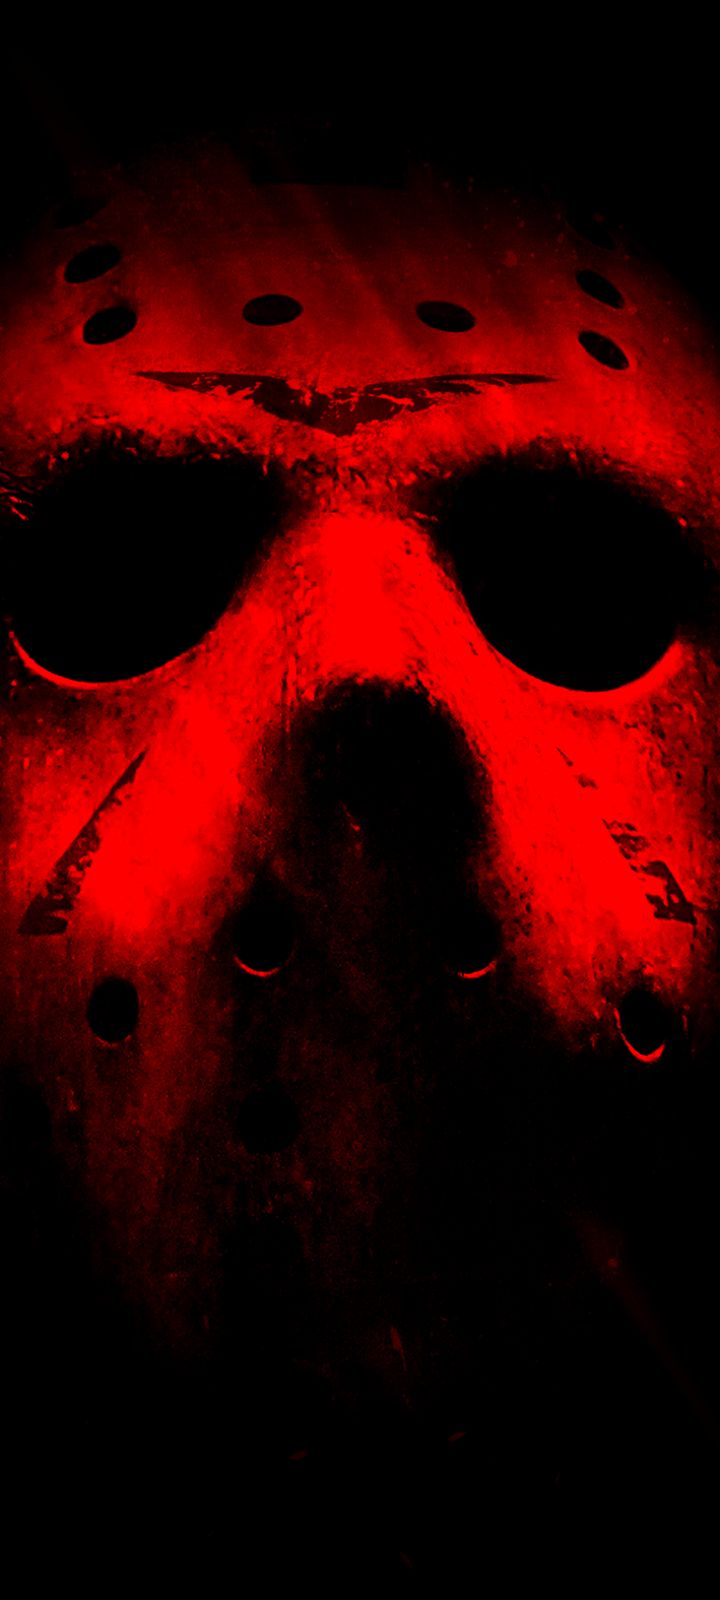 android movie, friday the 13th (2009), jason voorhees, friday the 13th